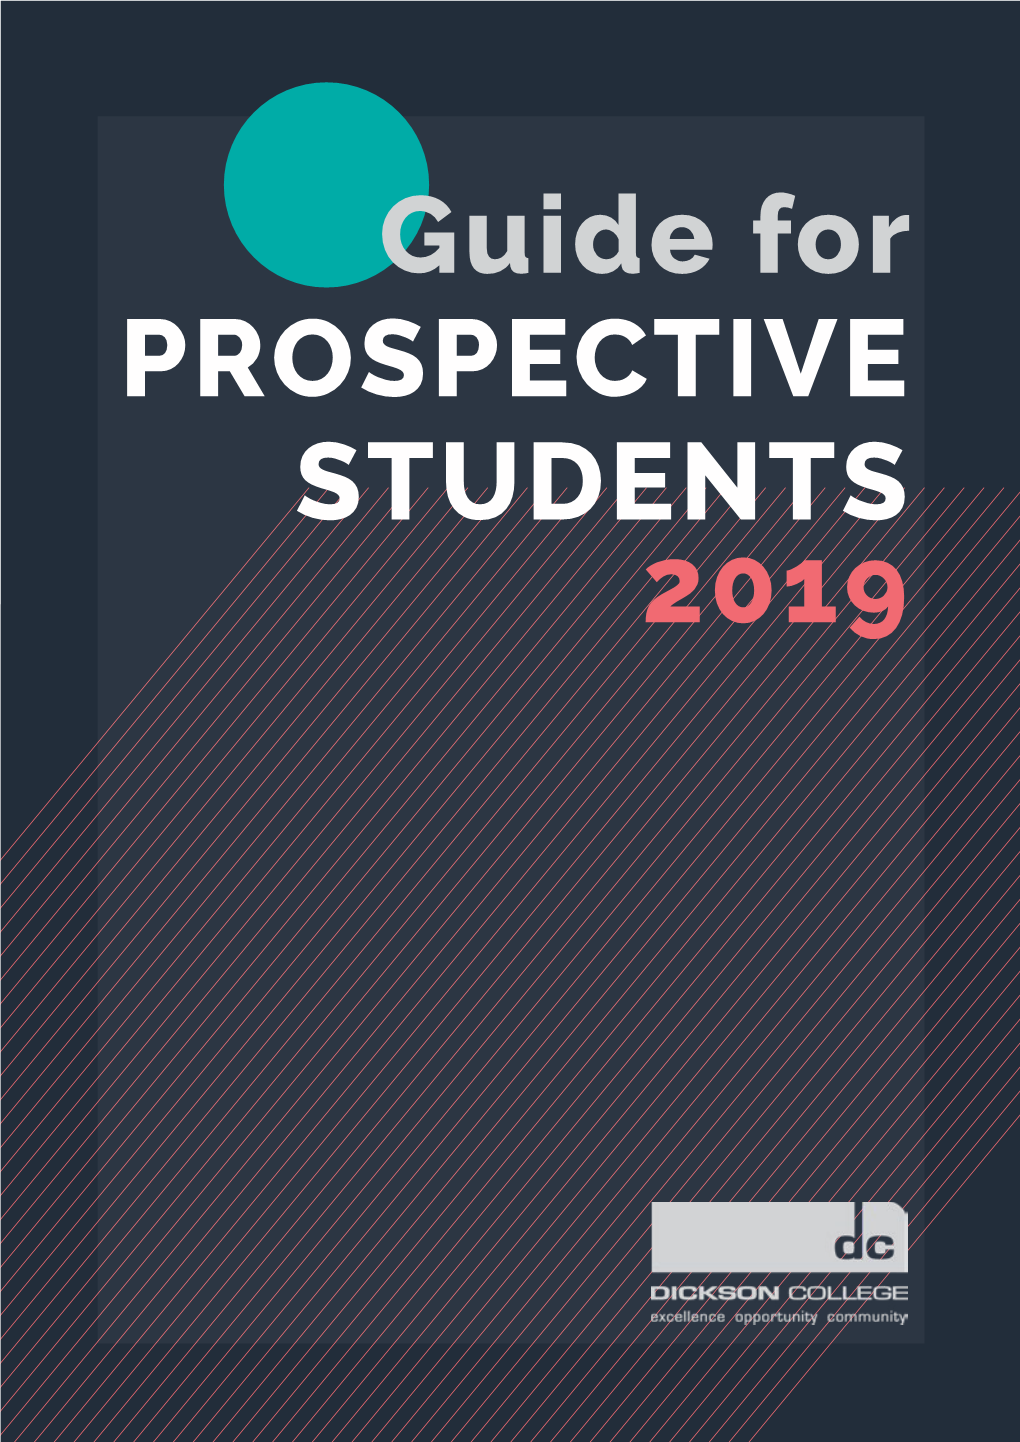 Guide for PROSPECTIVE STUDENTS 2019 Dickson College Is Committed to Providing a Supportive, Innovative and Educationally Enriched Learning Environment